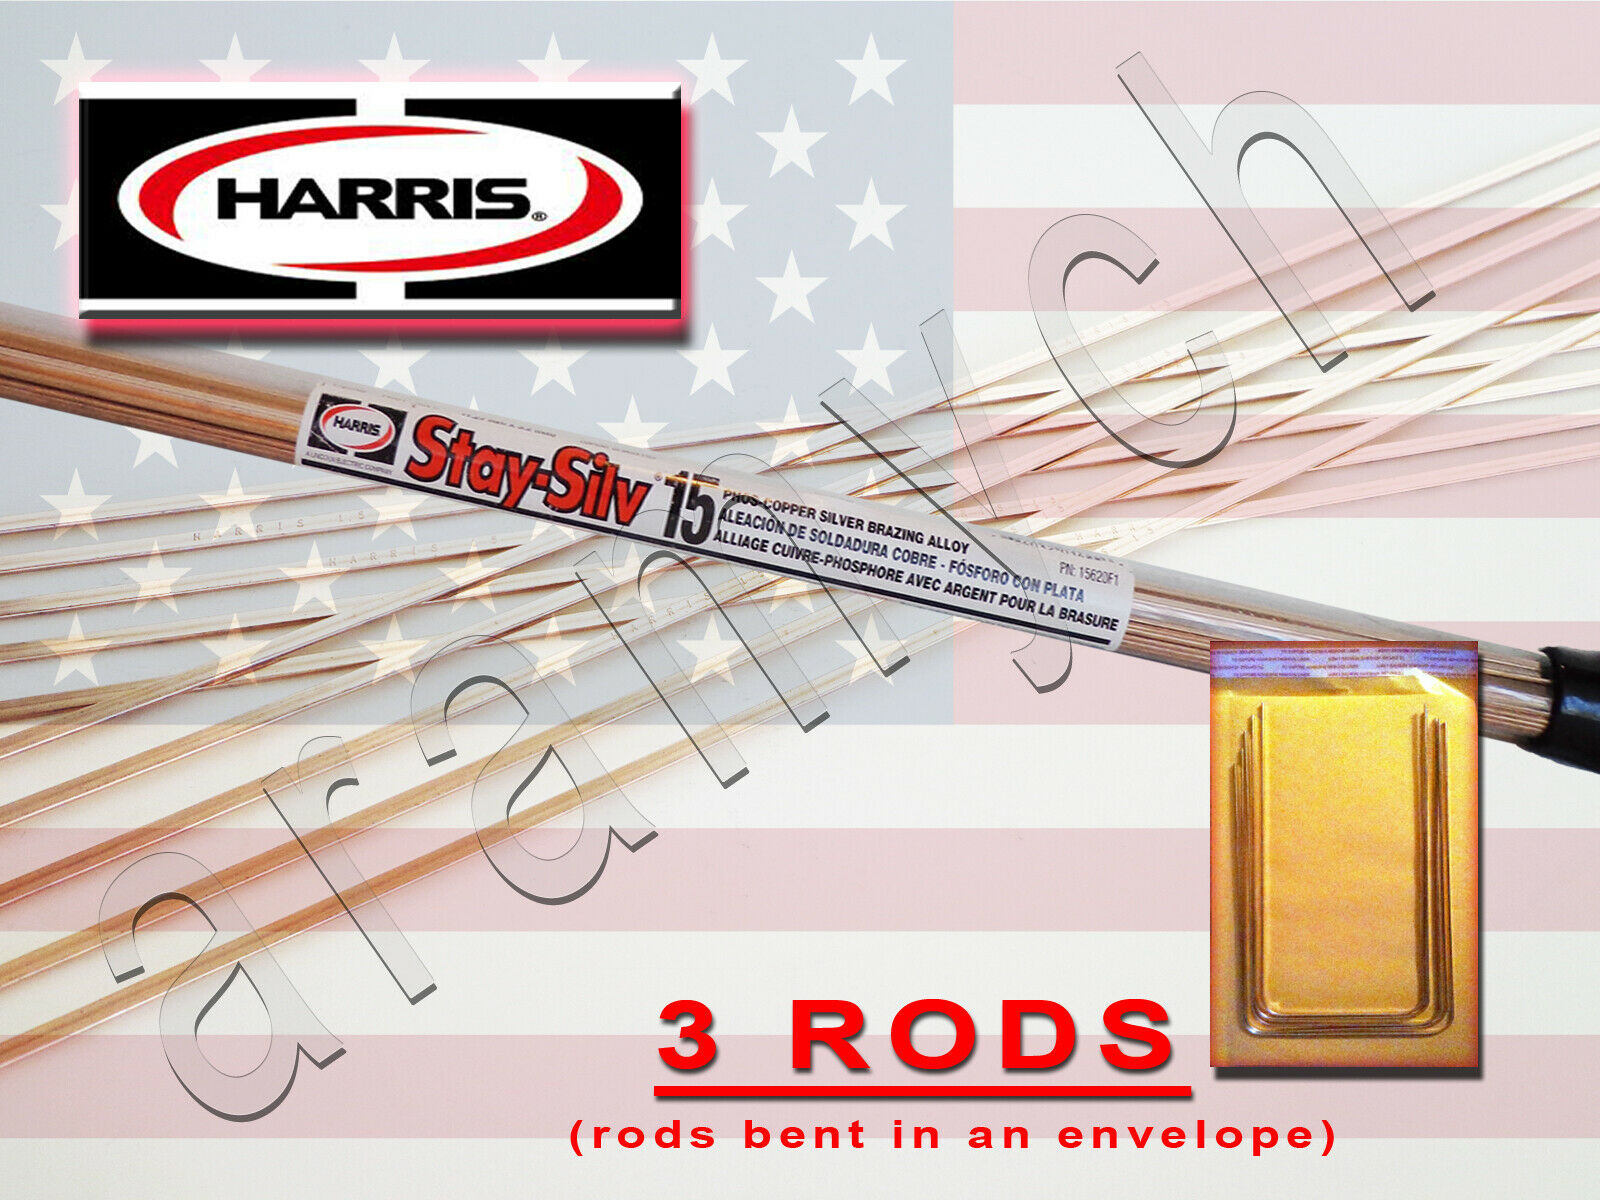 3 Rods Brazing Rods Harris Stay-silv 15% Soldering Rods Bcup-5